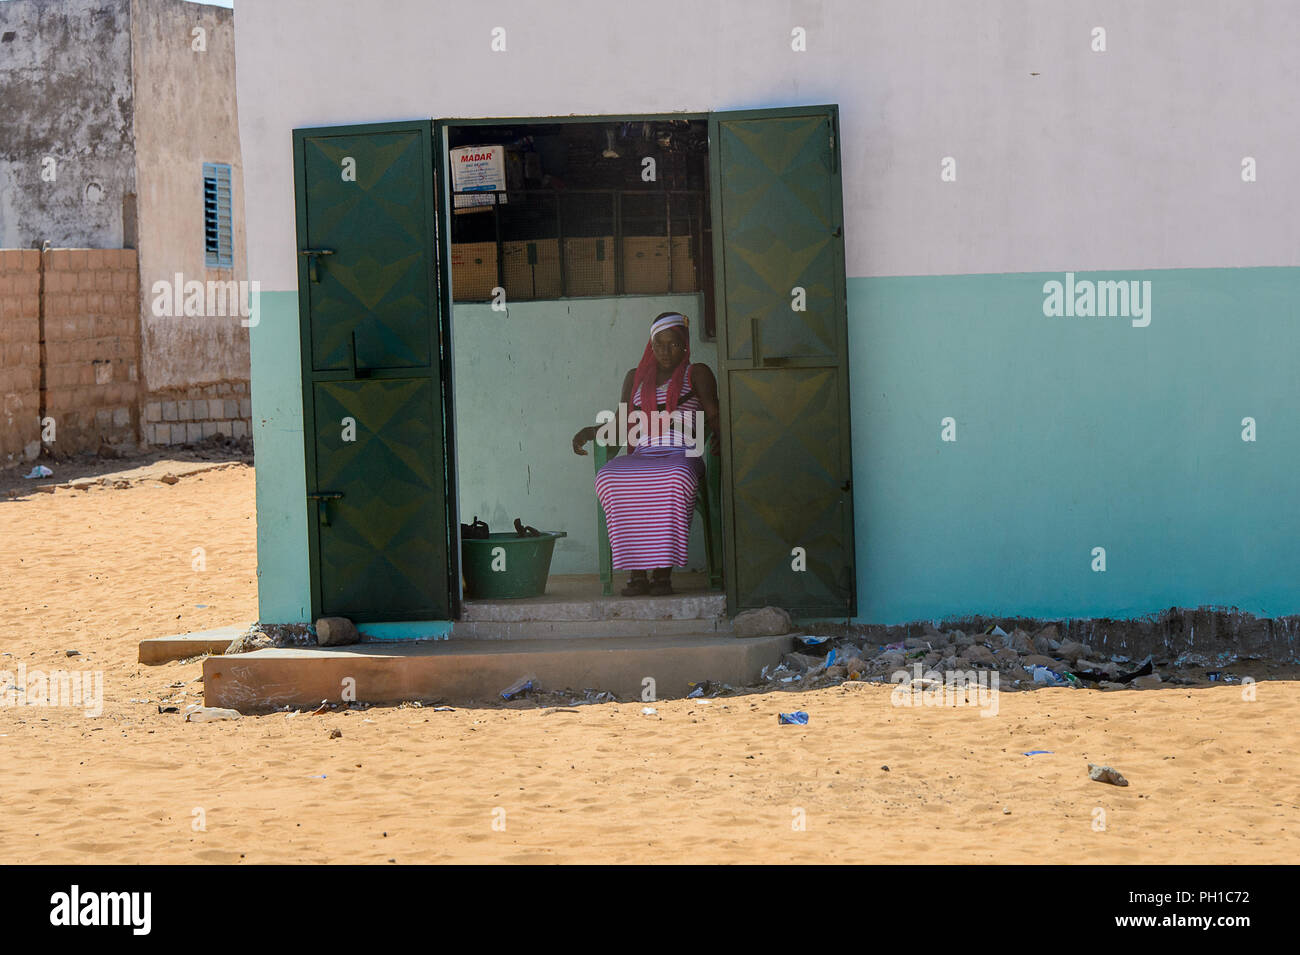 ROAD TO LAMPOUL, SENEGAL - APR 23, 2017: Unidentified Senegalese woman in striped dress sits in a chair in the doorway. Still many people in Senegal l Stock Photo